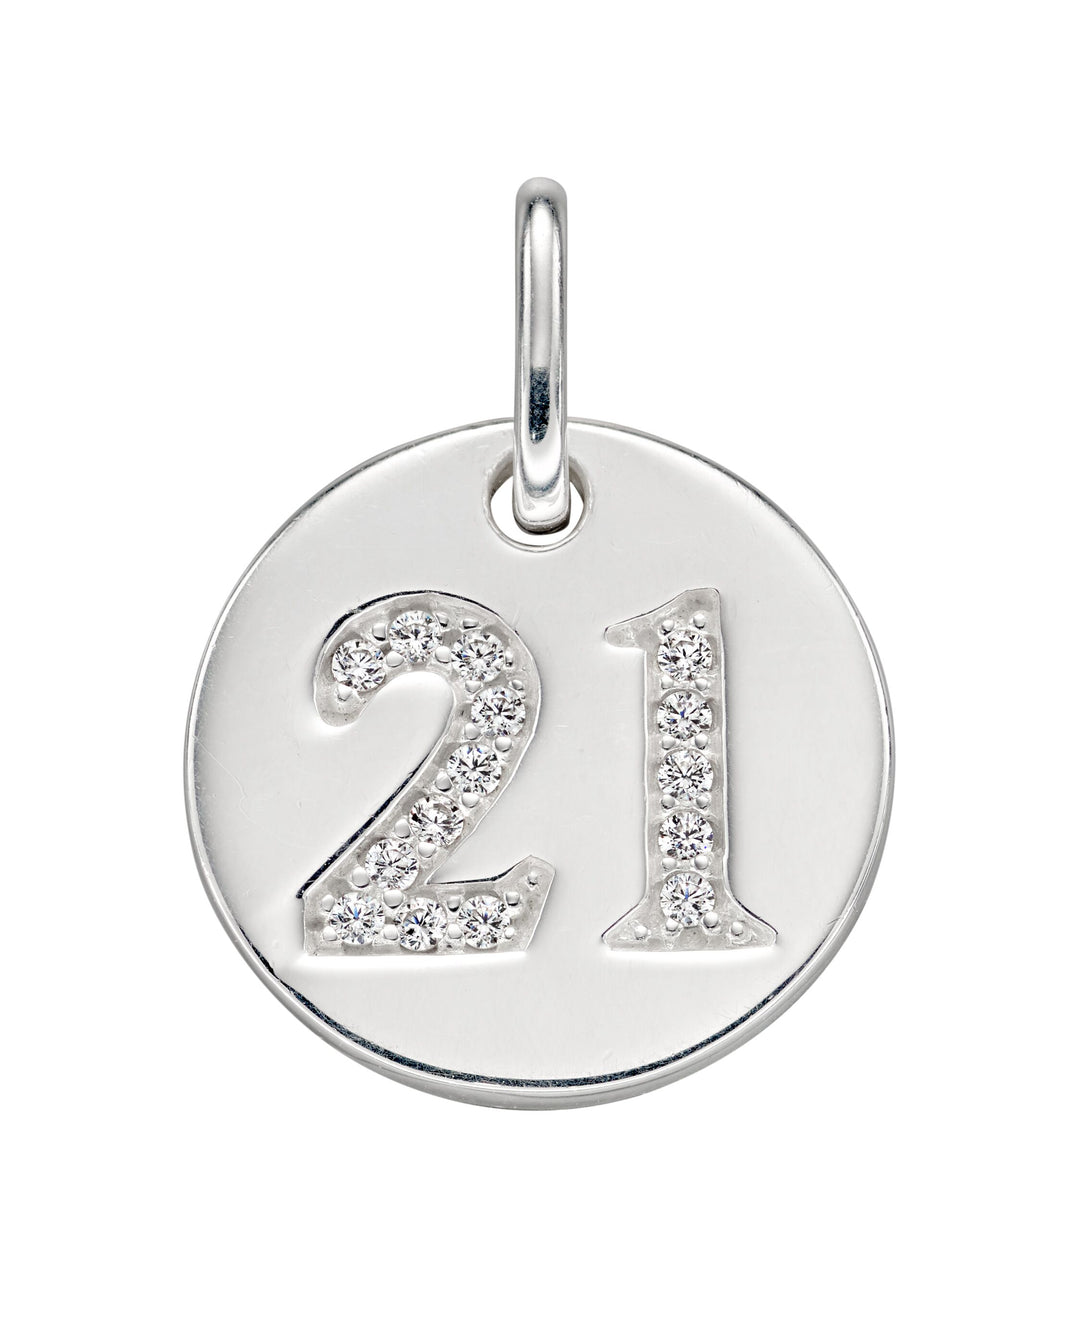 Penmans |  Special Occasion '21' Charm